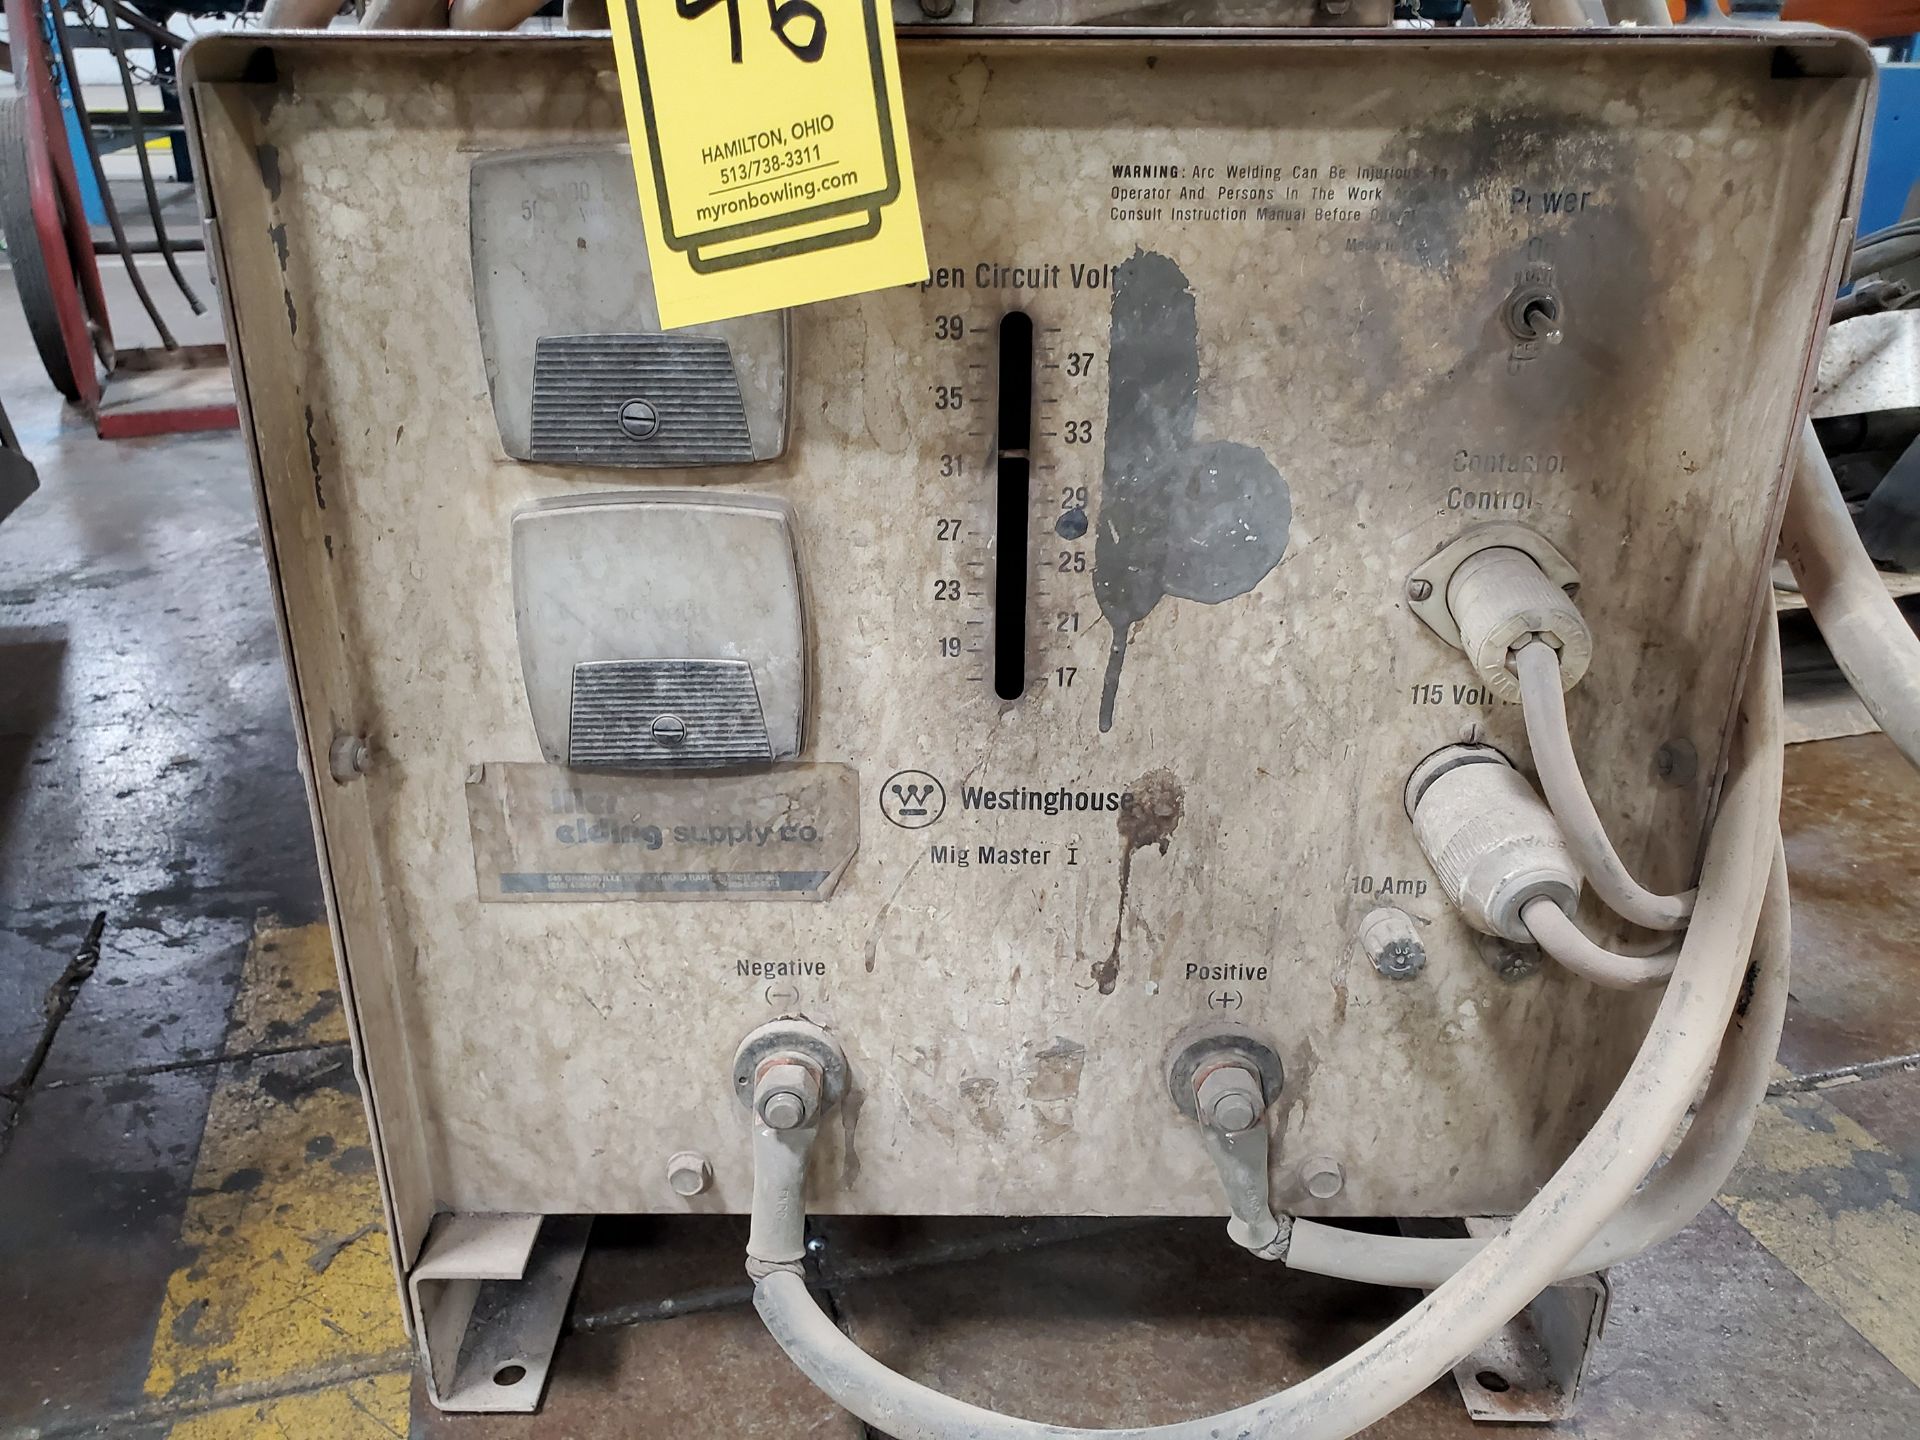 WESTINGHOUSE MIG MASTER WELDER WITH LINCOLN L7 WIRE FEEDER, WELDING HEAD - Image 3 of 5